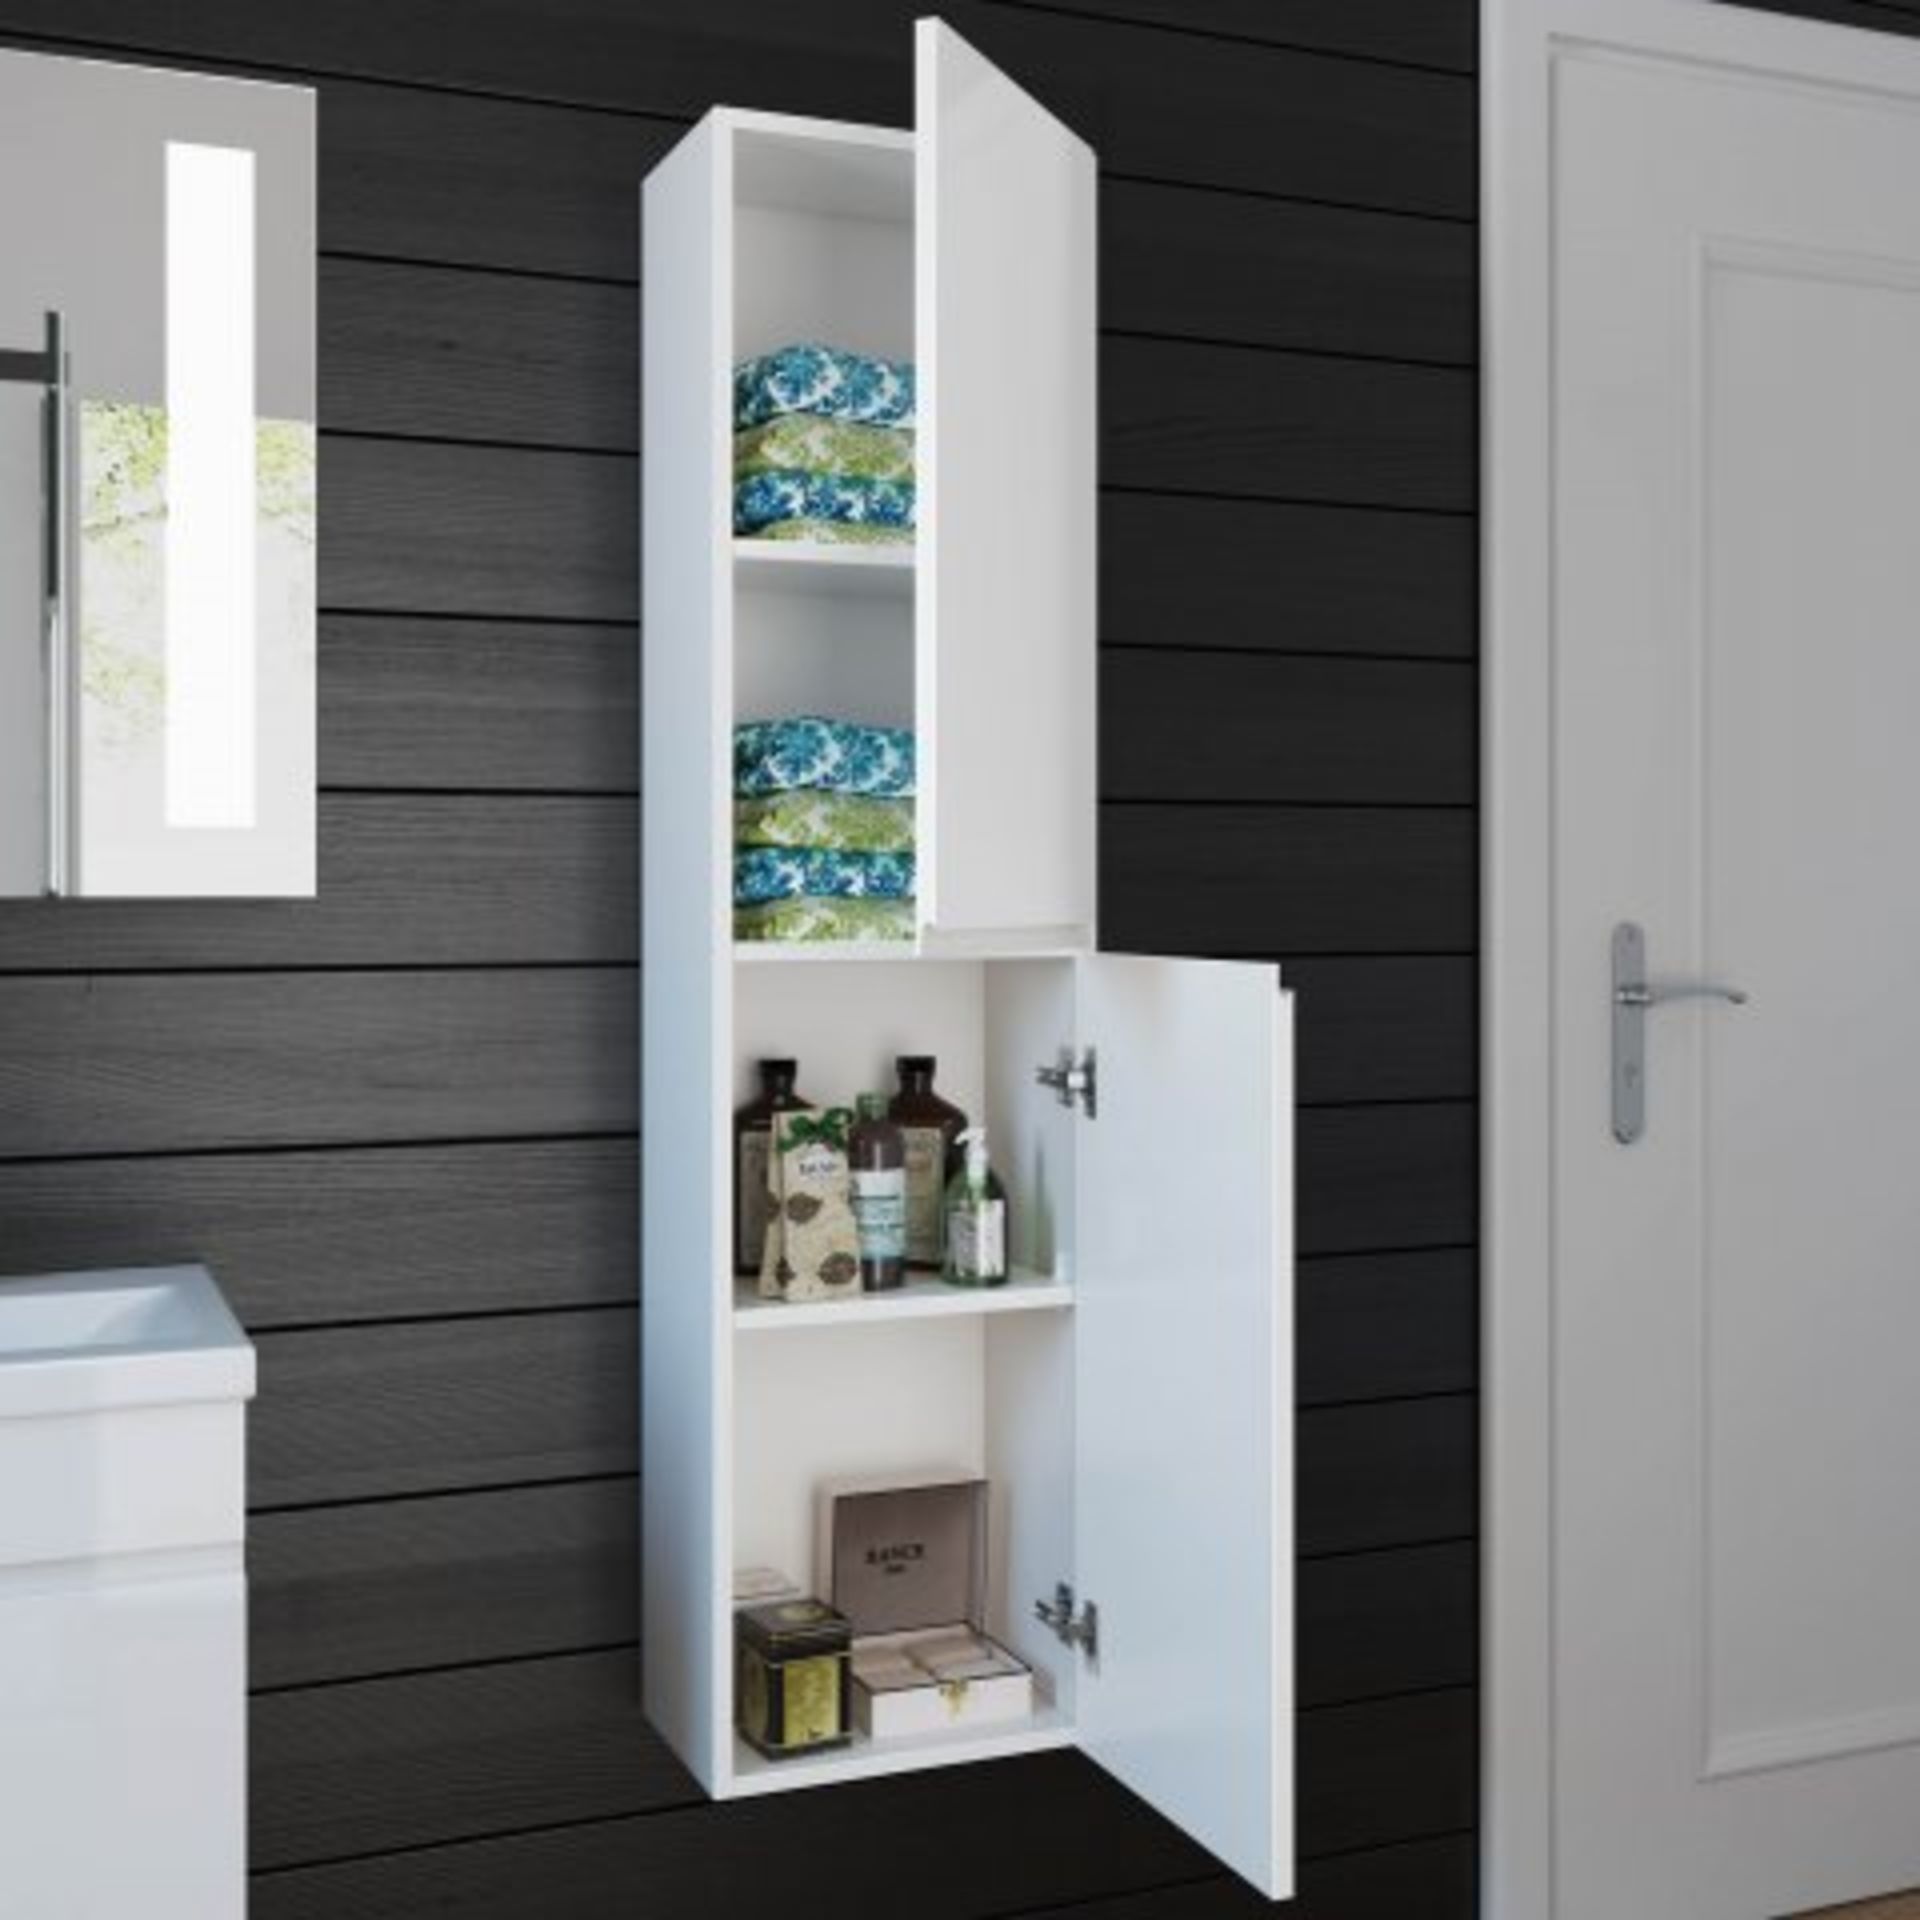 (H222) 1400mm Trent Gloss White Tall Storage Cabinet - Wall Hung. RRP £259.99. Our Trent Gloss White - Image 2 of 3